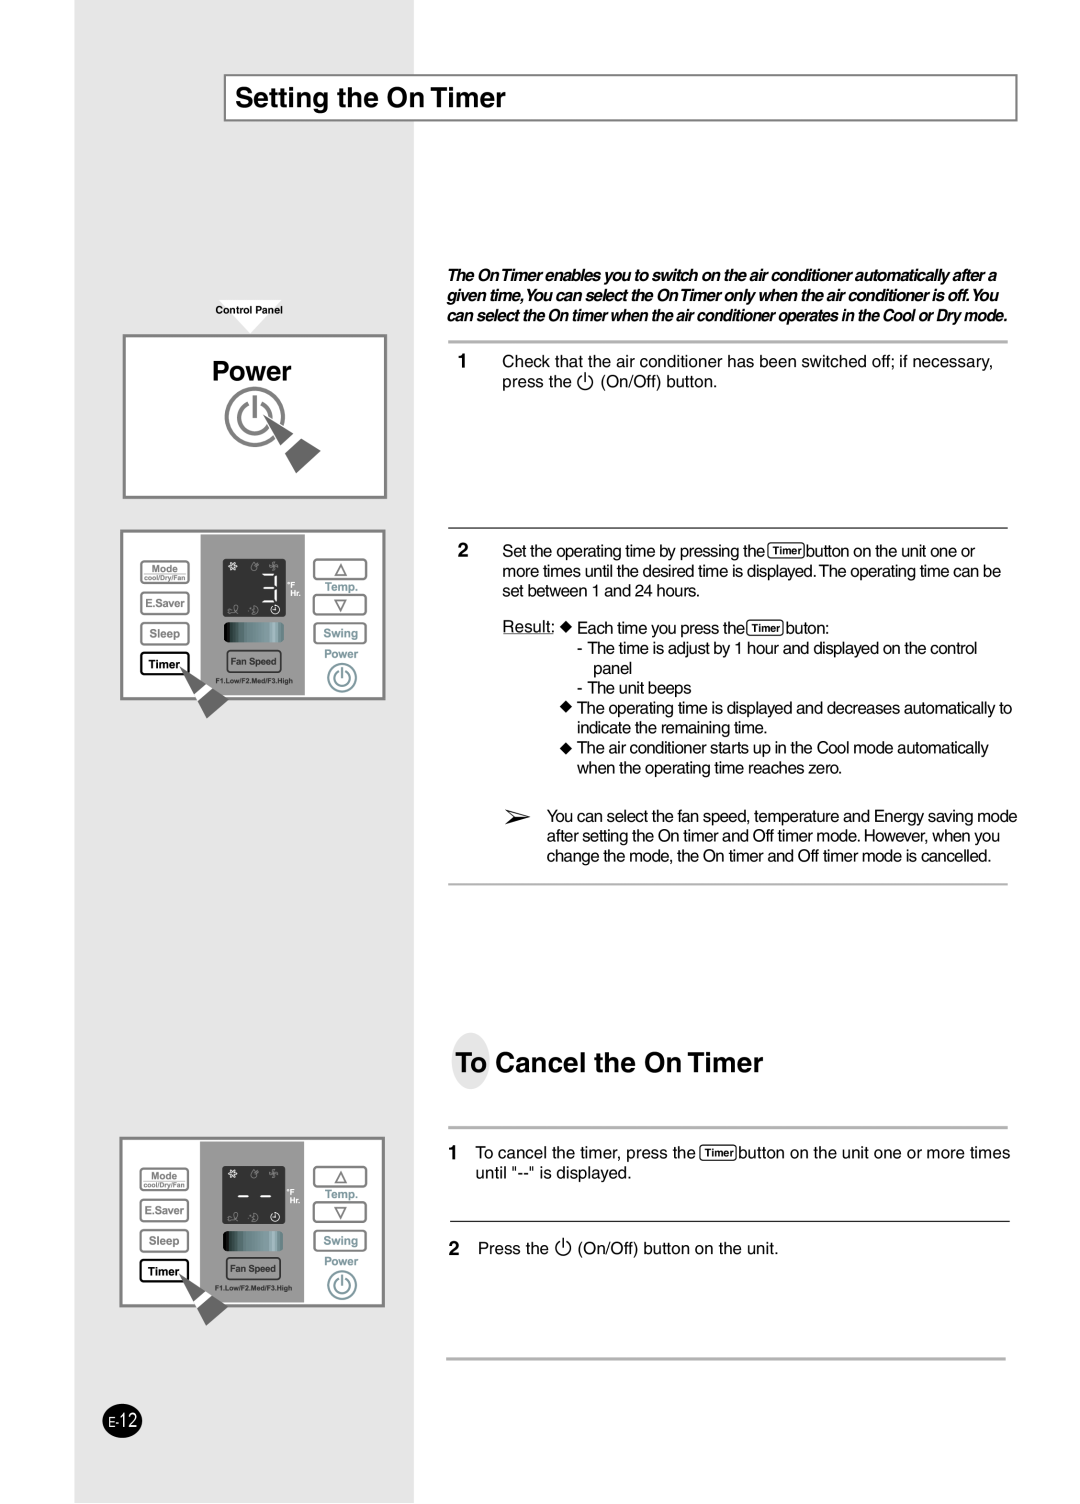 Samsung AW2492L manual Setting the On Timer, To Cancel the On Timer, Power 